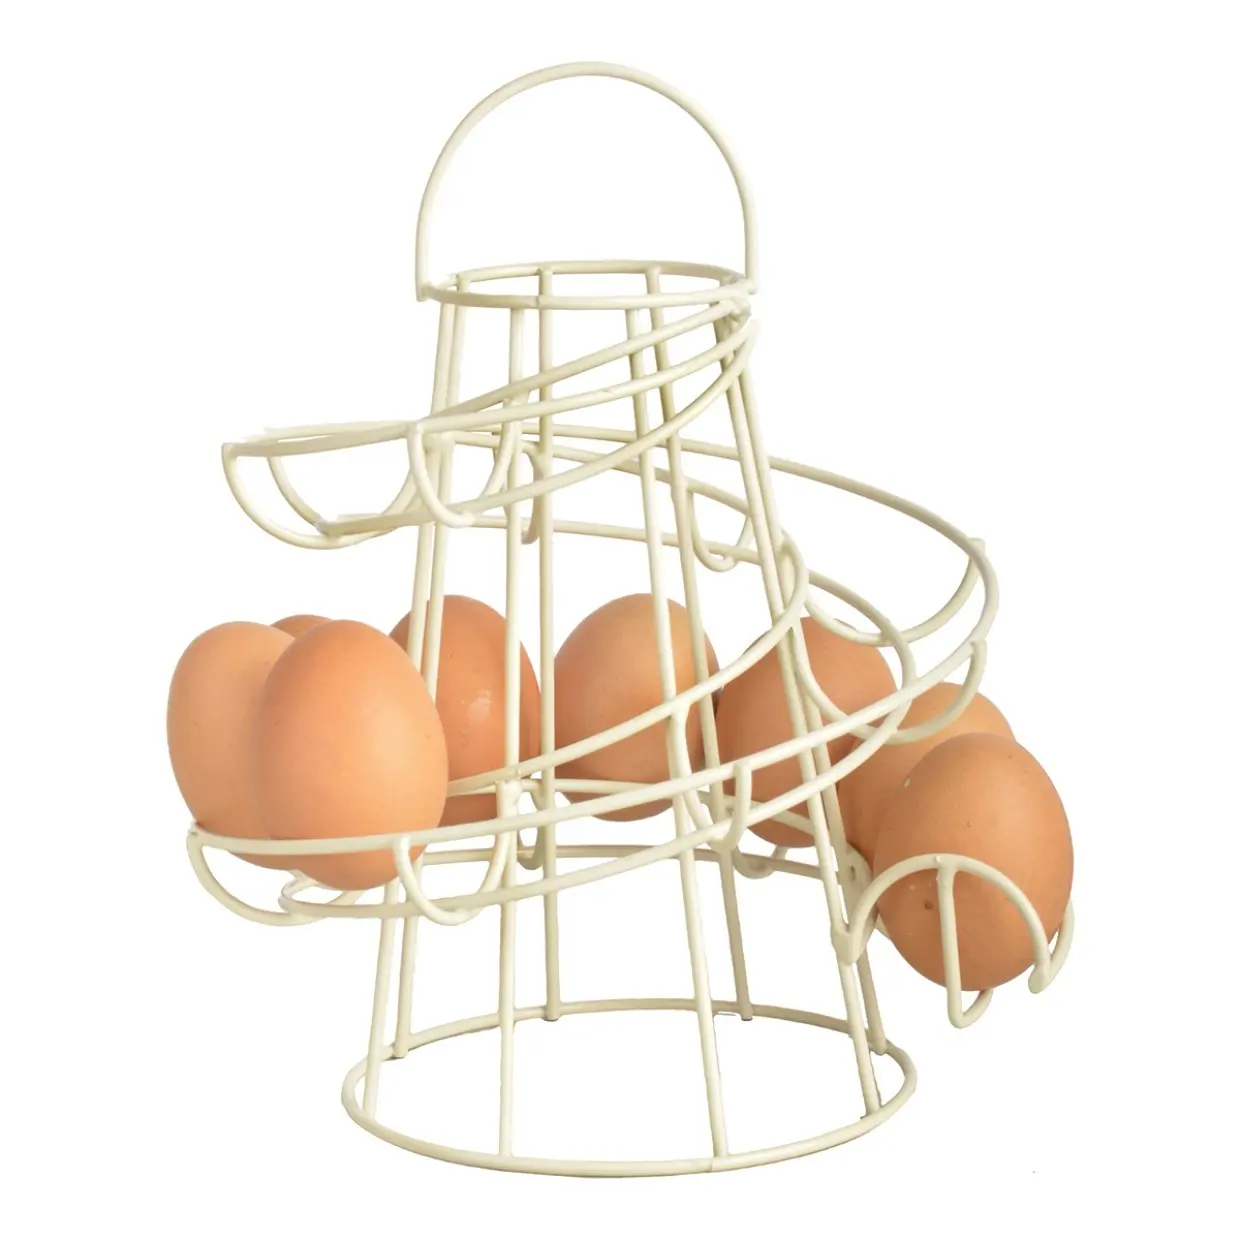 Latest Arrival Trending Hot Selling Unique Style Egg Storage Holder with Handle Metal Chicken Egg Basket In White Spiral Design